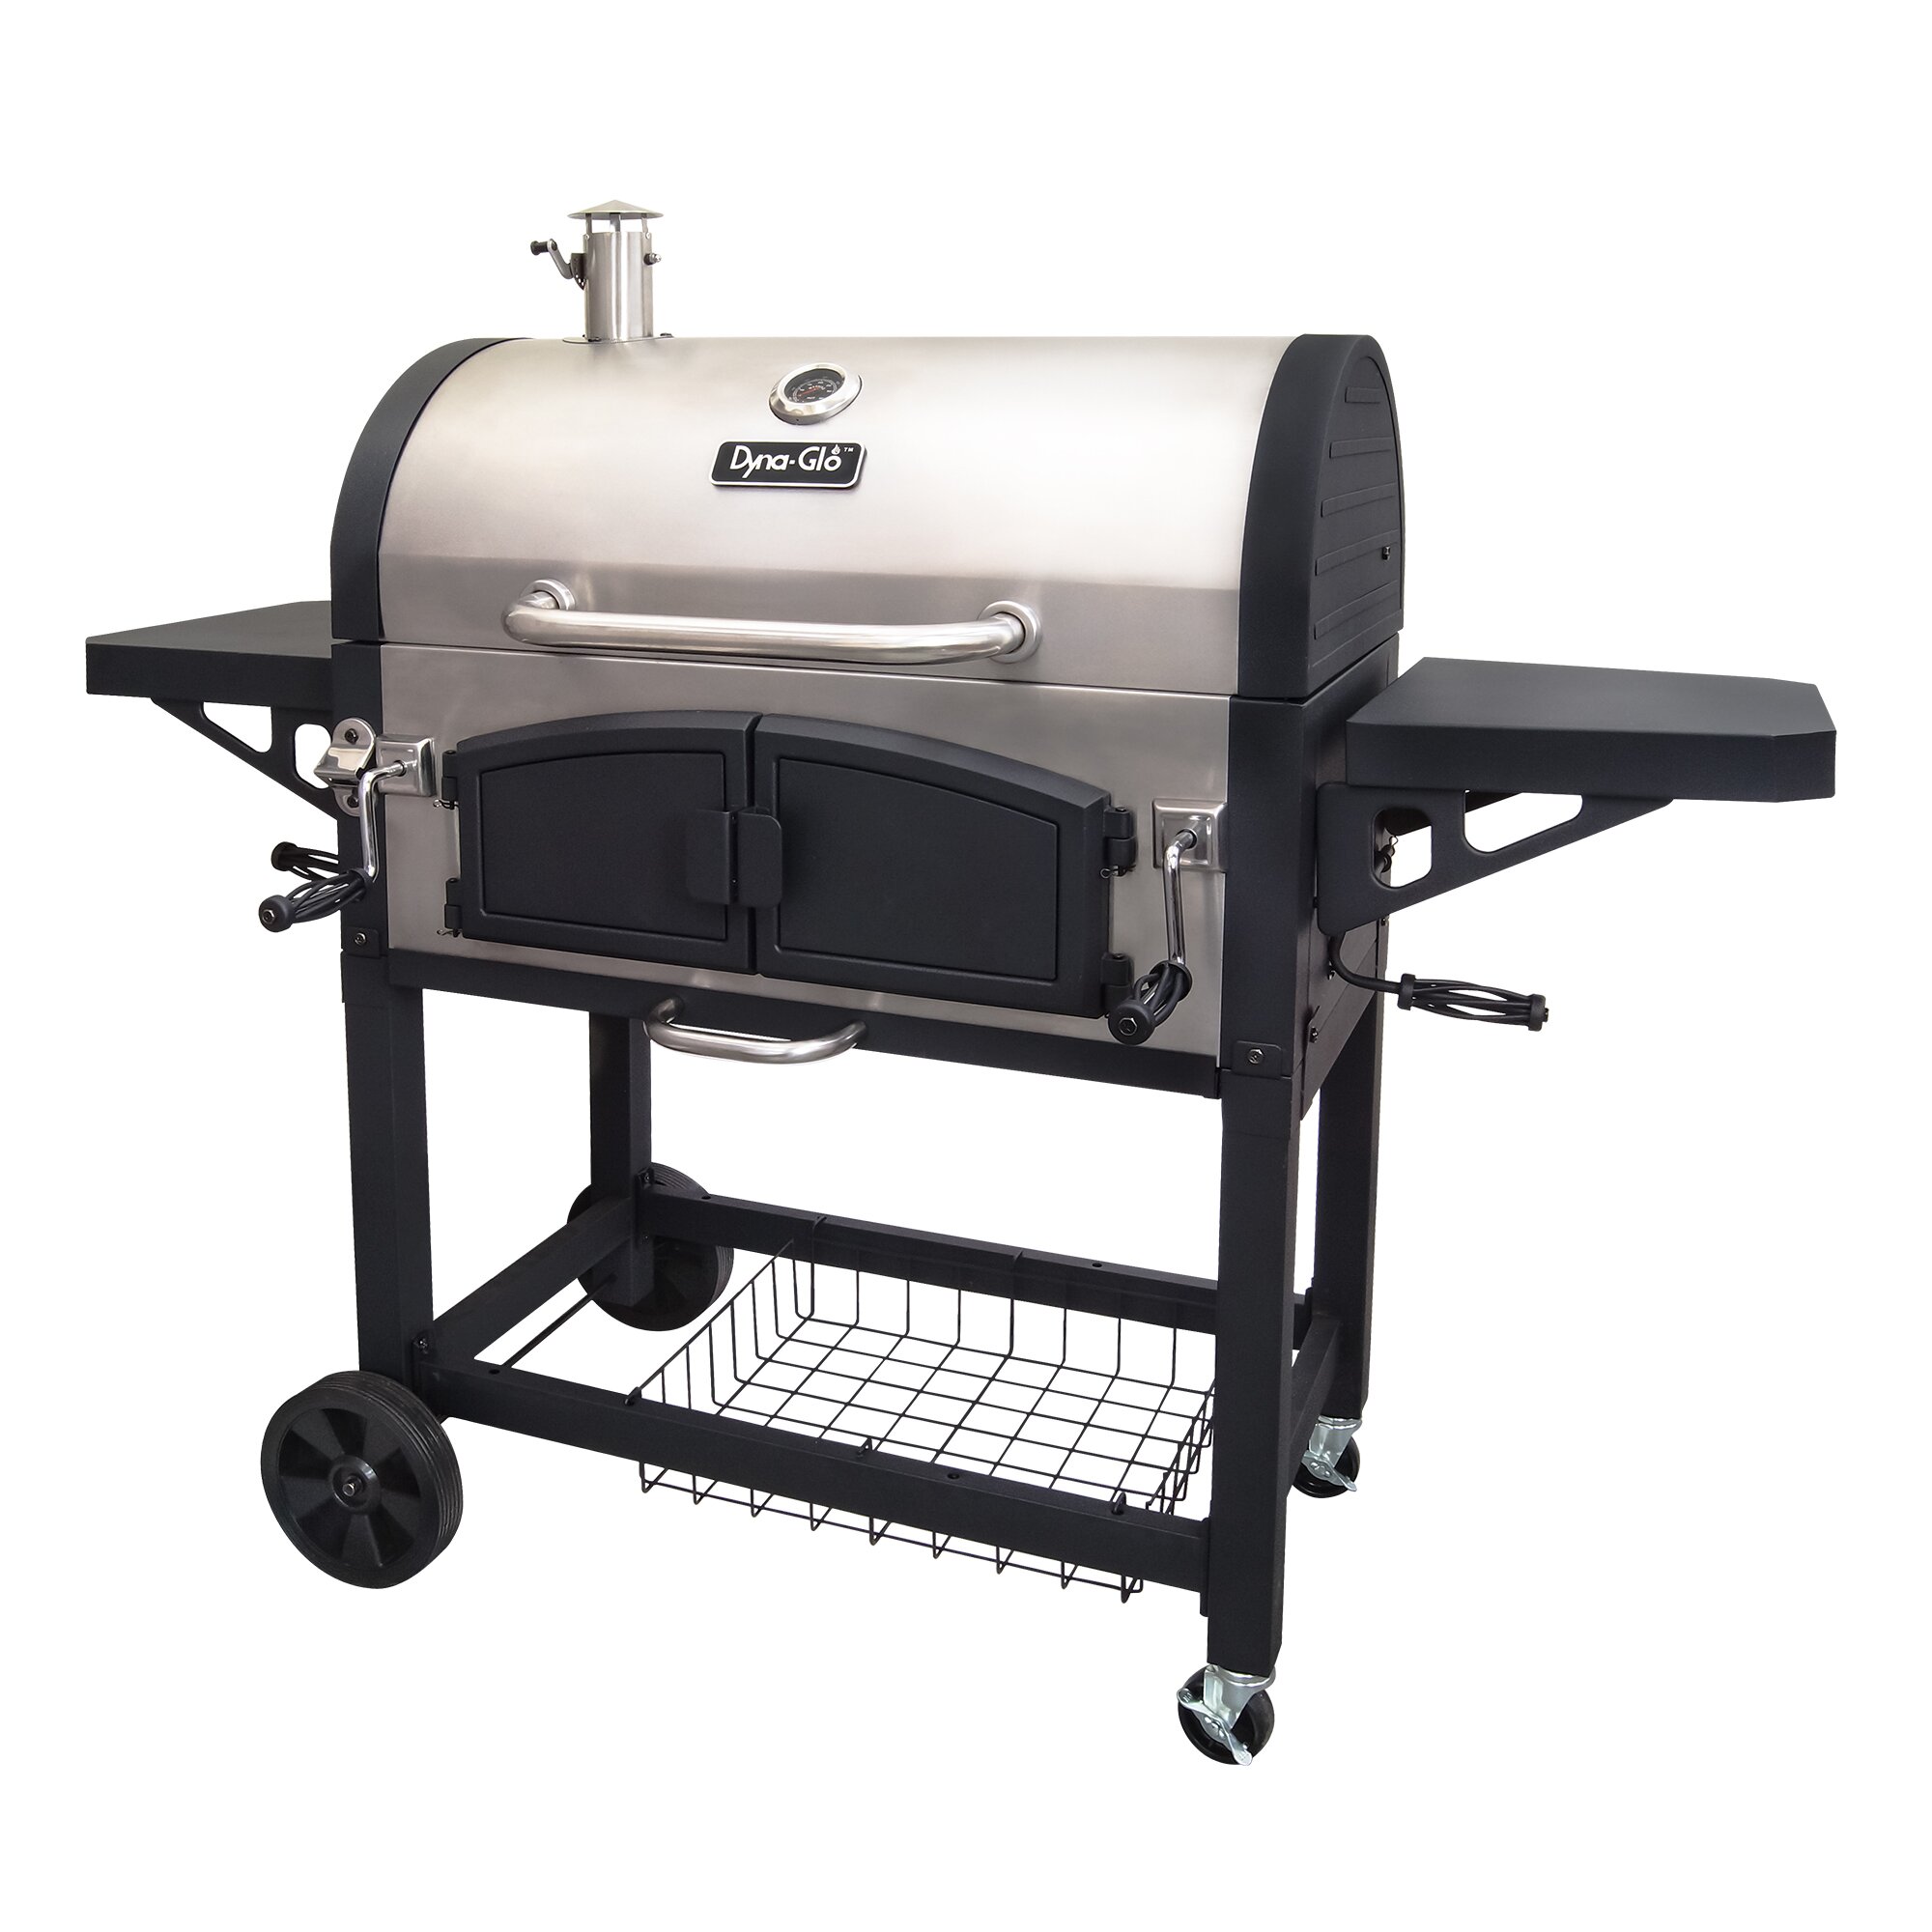 Dyna Glo Dual Chamber Charcoal Grill With Adjustable Charcoal Trays And Easy Access Charcoal Door DGN576SNC D 